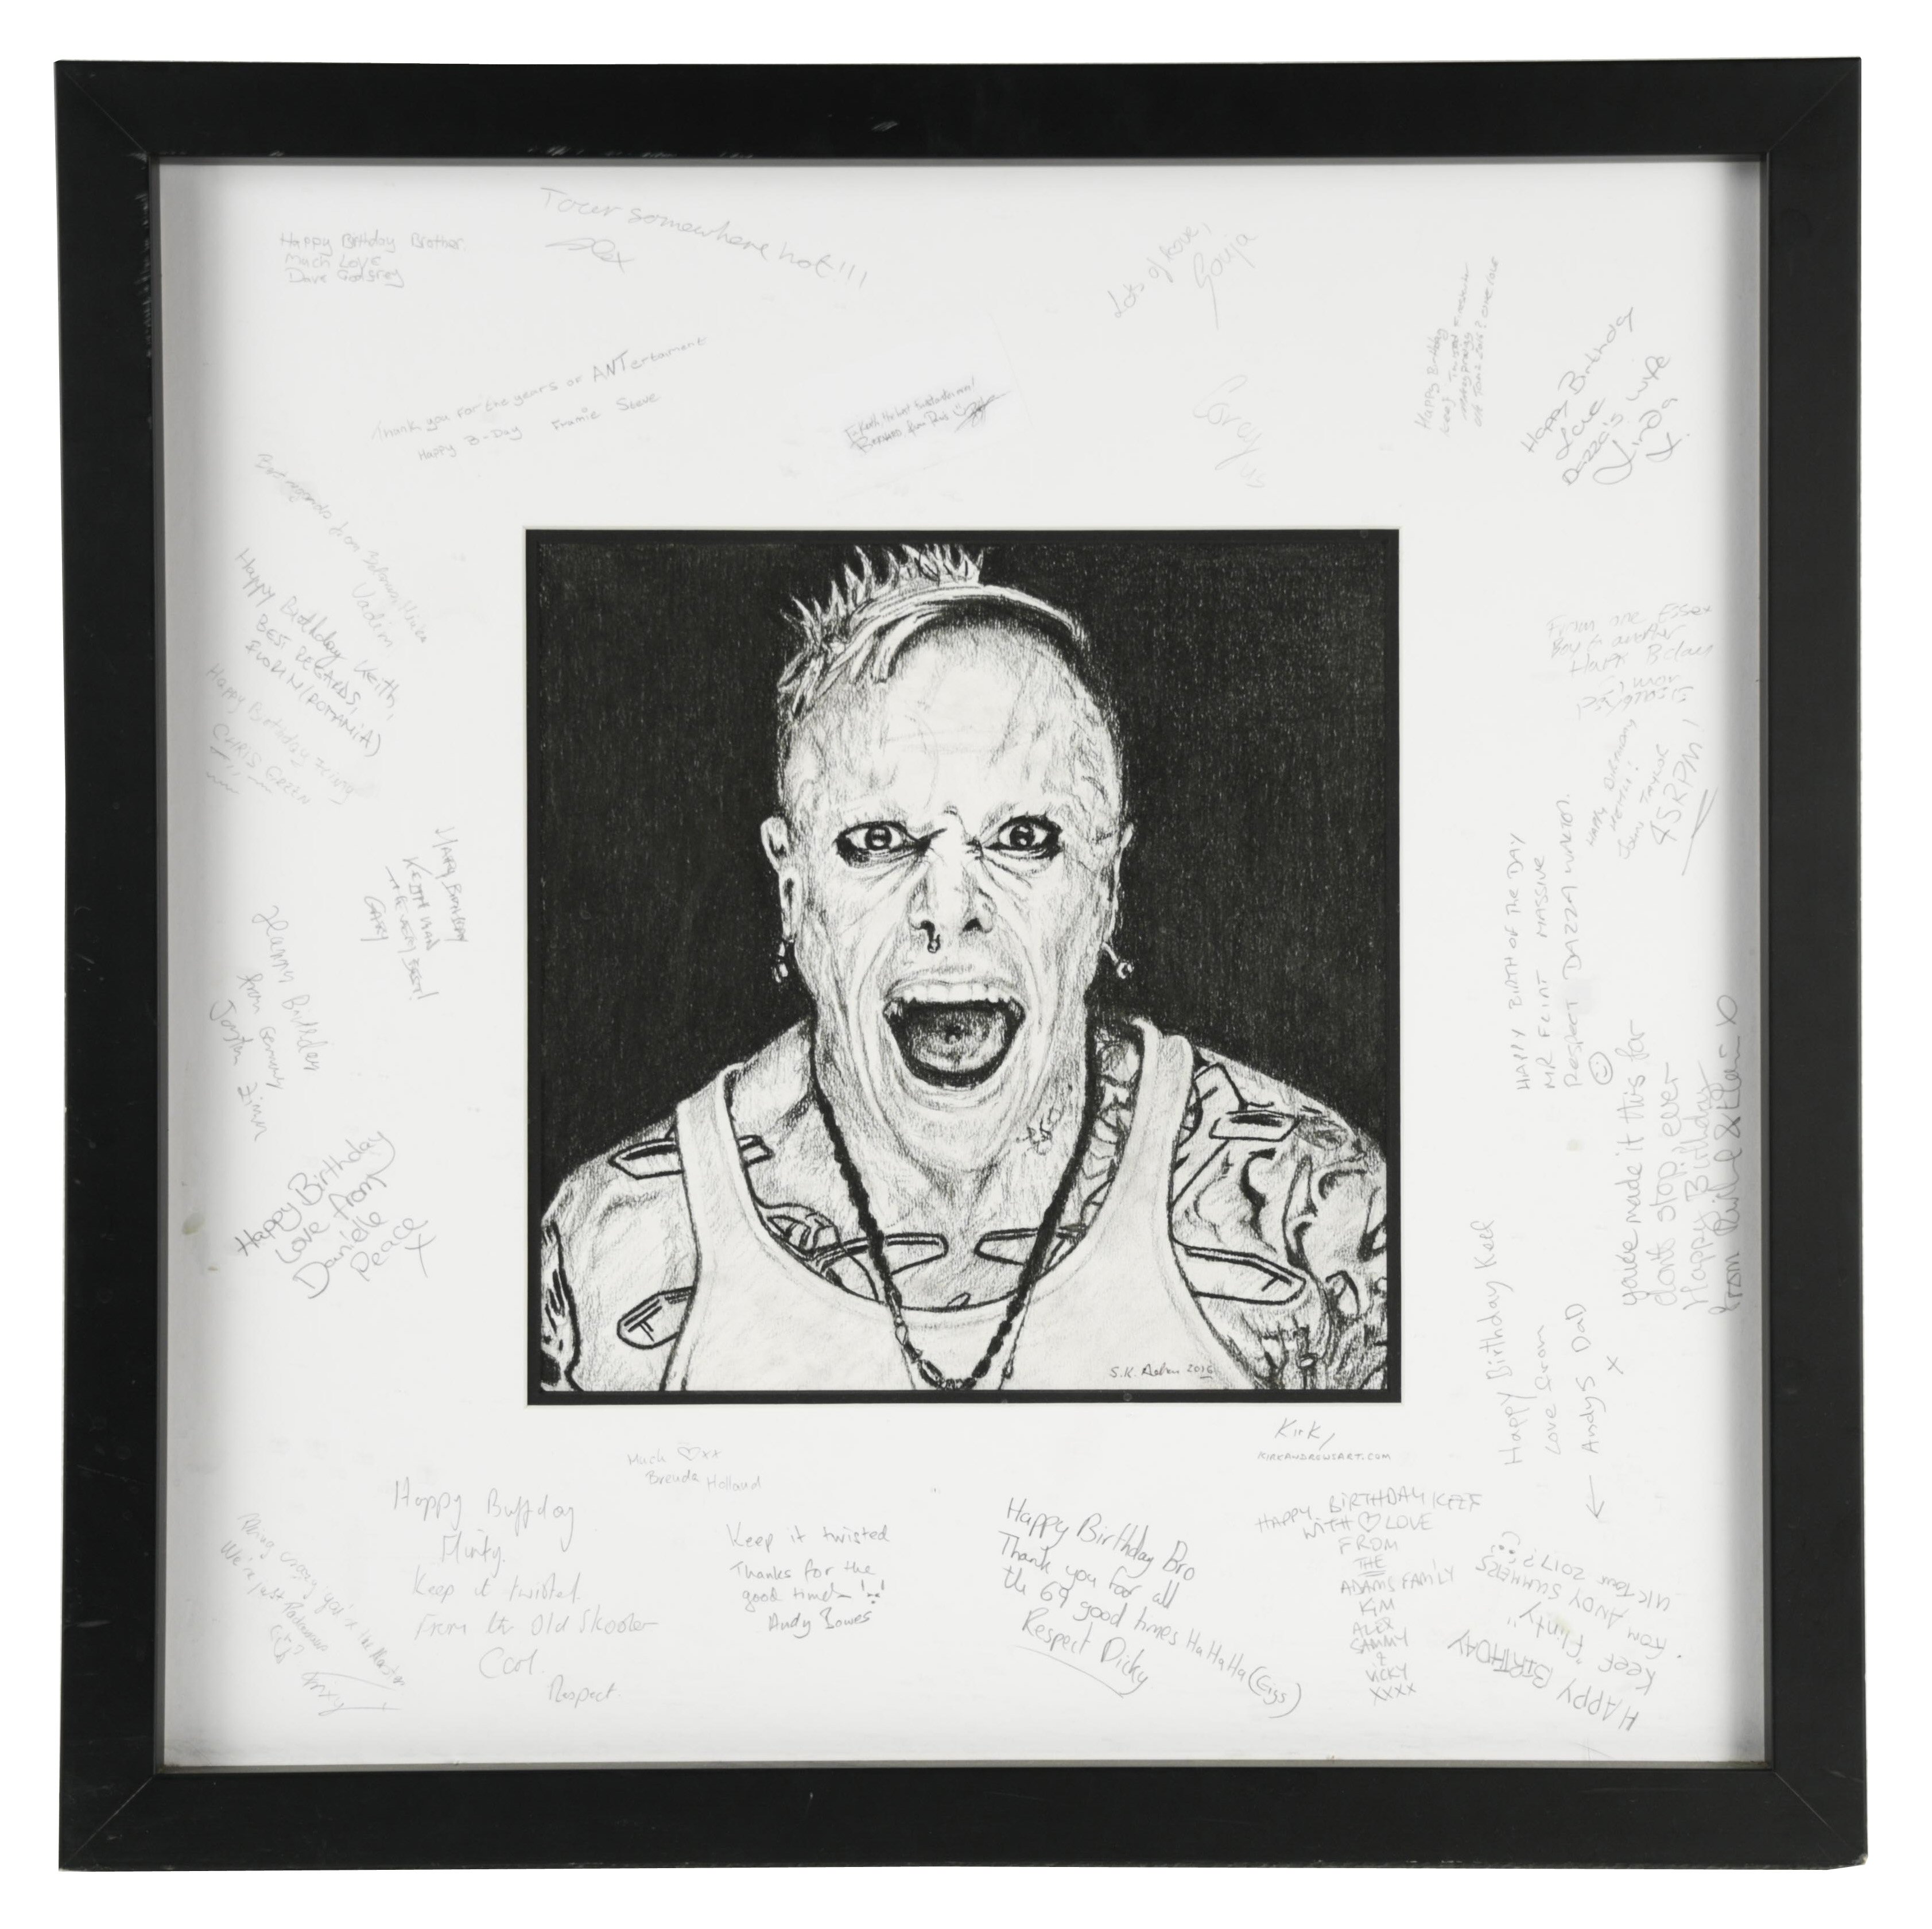 A pencil portrait of Keith Flint that was presented to him on his 47th birthday from regulars at his pub, the Leather Bottle in Pleshey, Essex, will be sold at auction. (Cheffins/ PA)